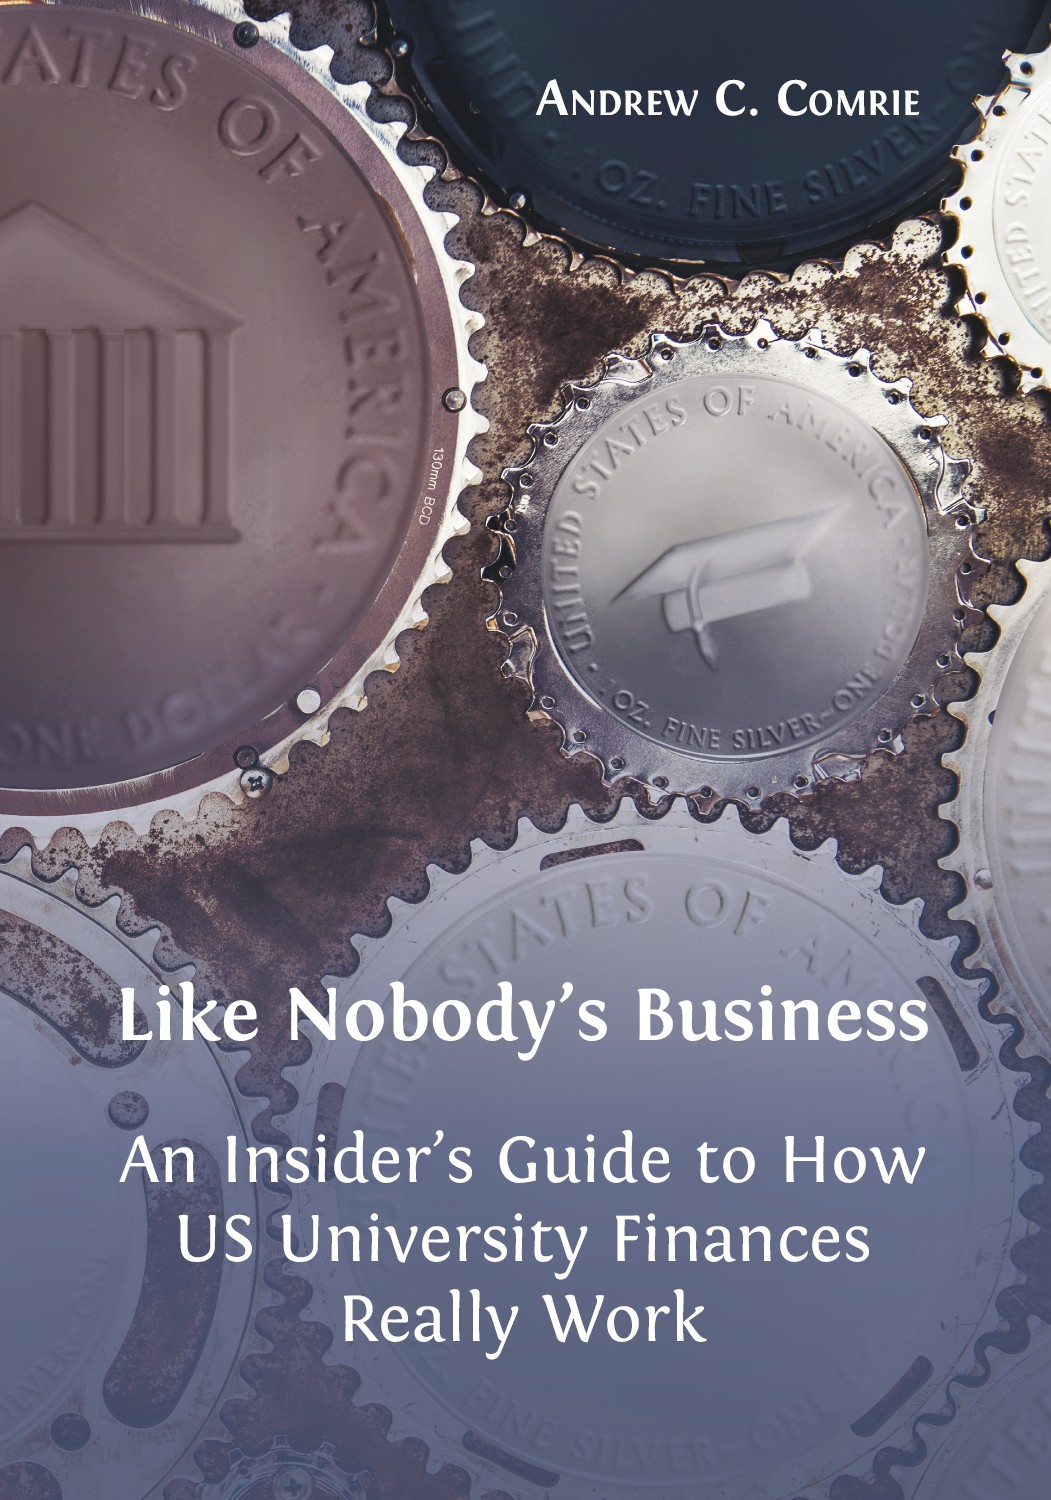 Like Nobody's Business book cover image